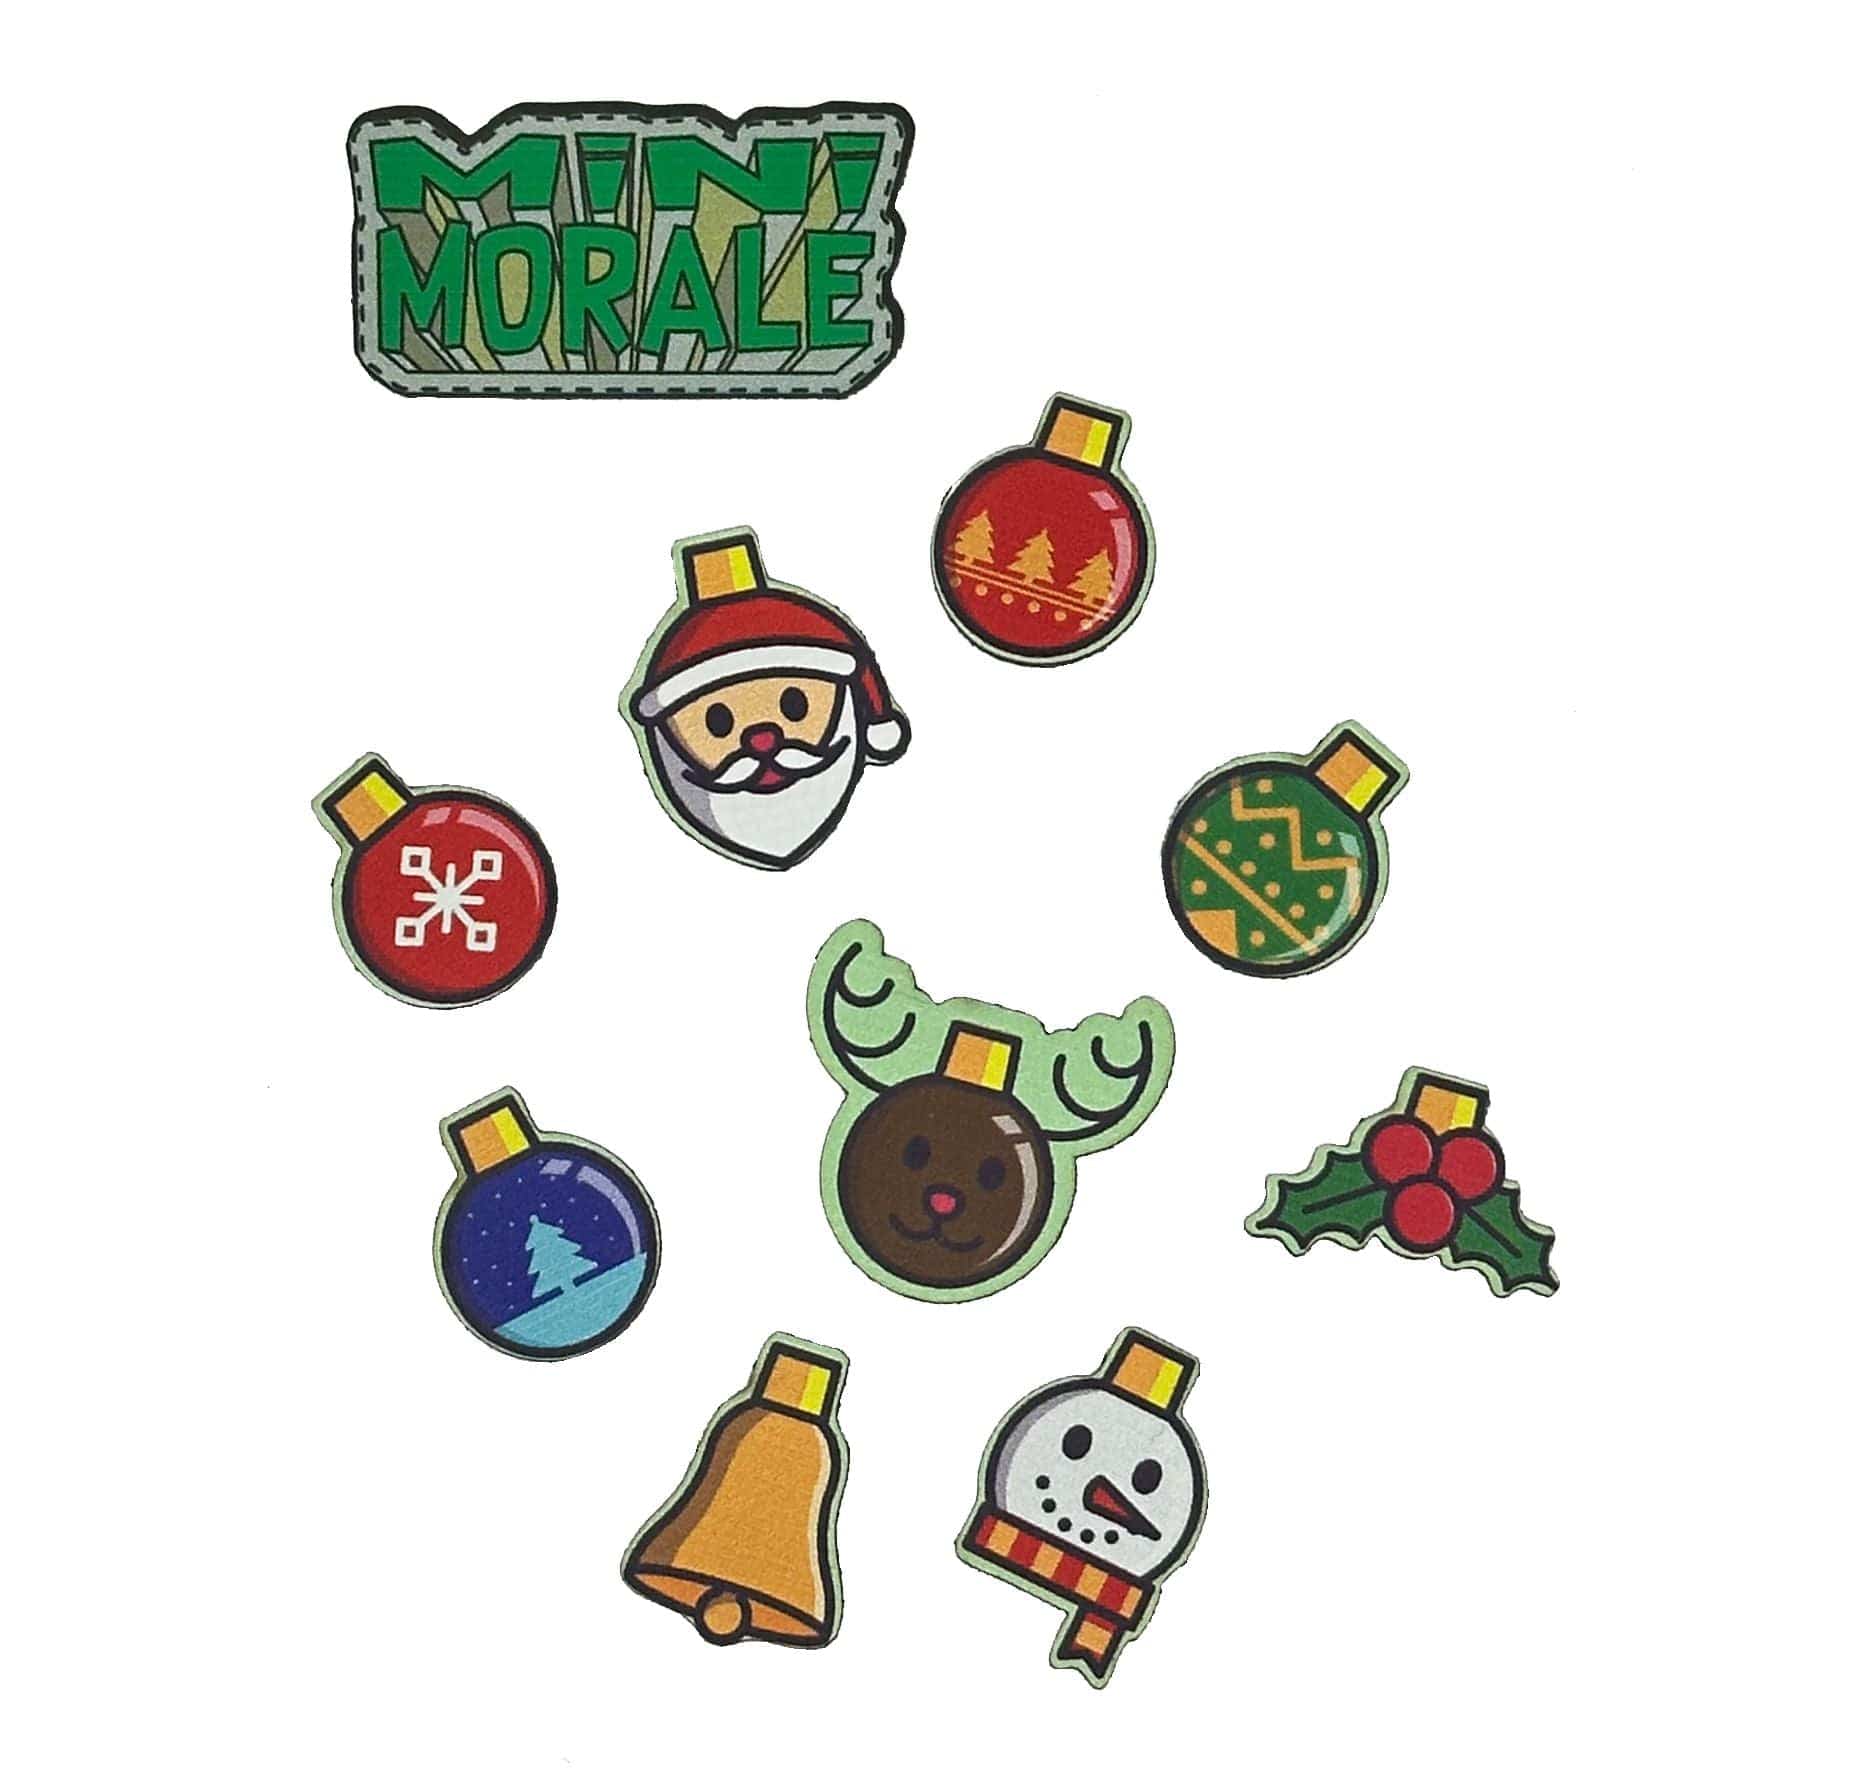 Tactical Gear Junkie Patches Mini Morale - Christmas Ornament Patch Pack 2